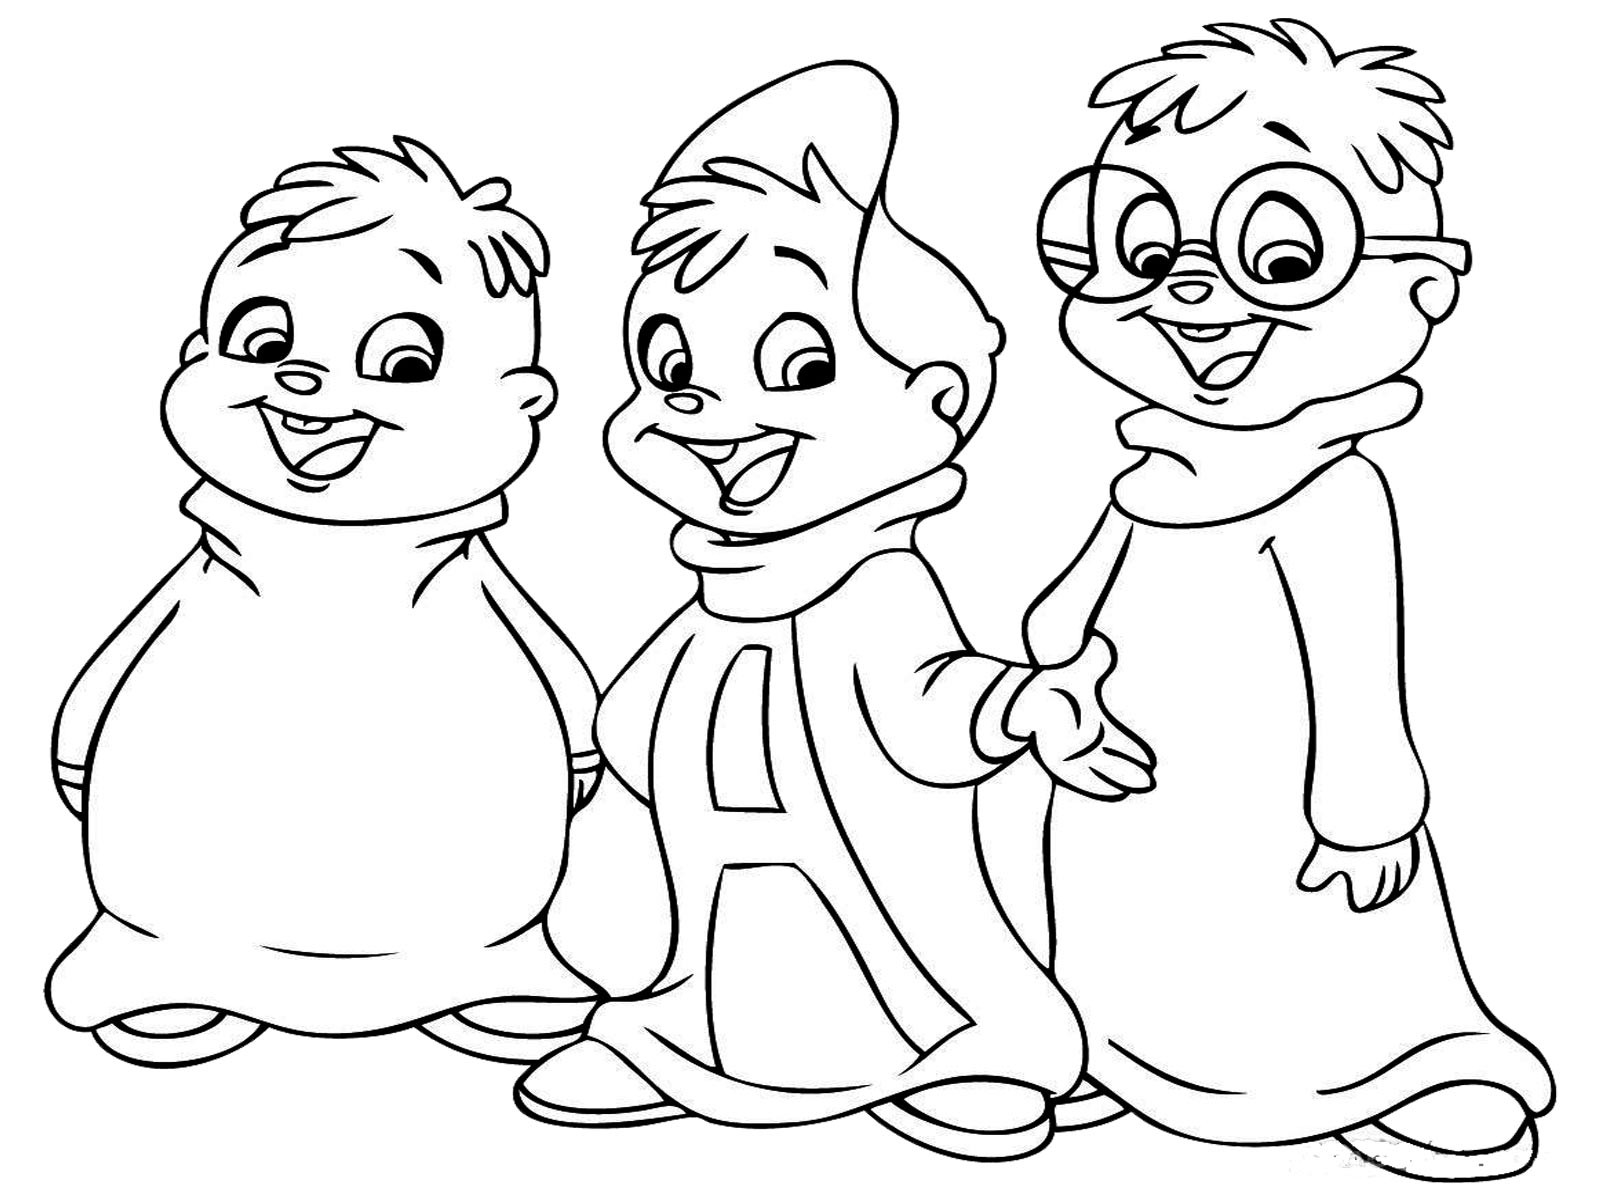 For Boys Coloring Sheets
 Coloring Pages for Boys 2018 Dr Odd